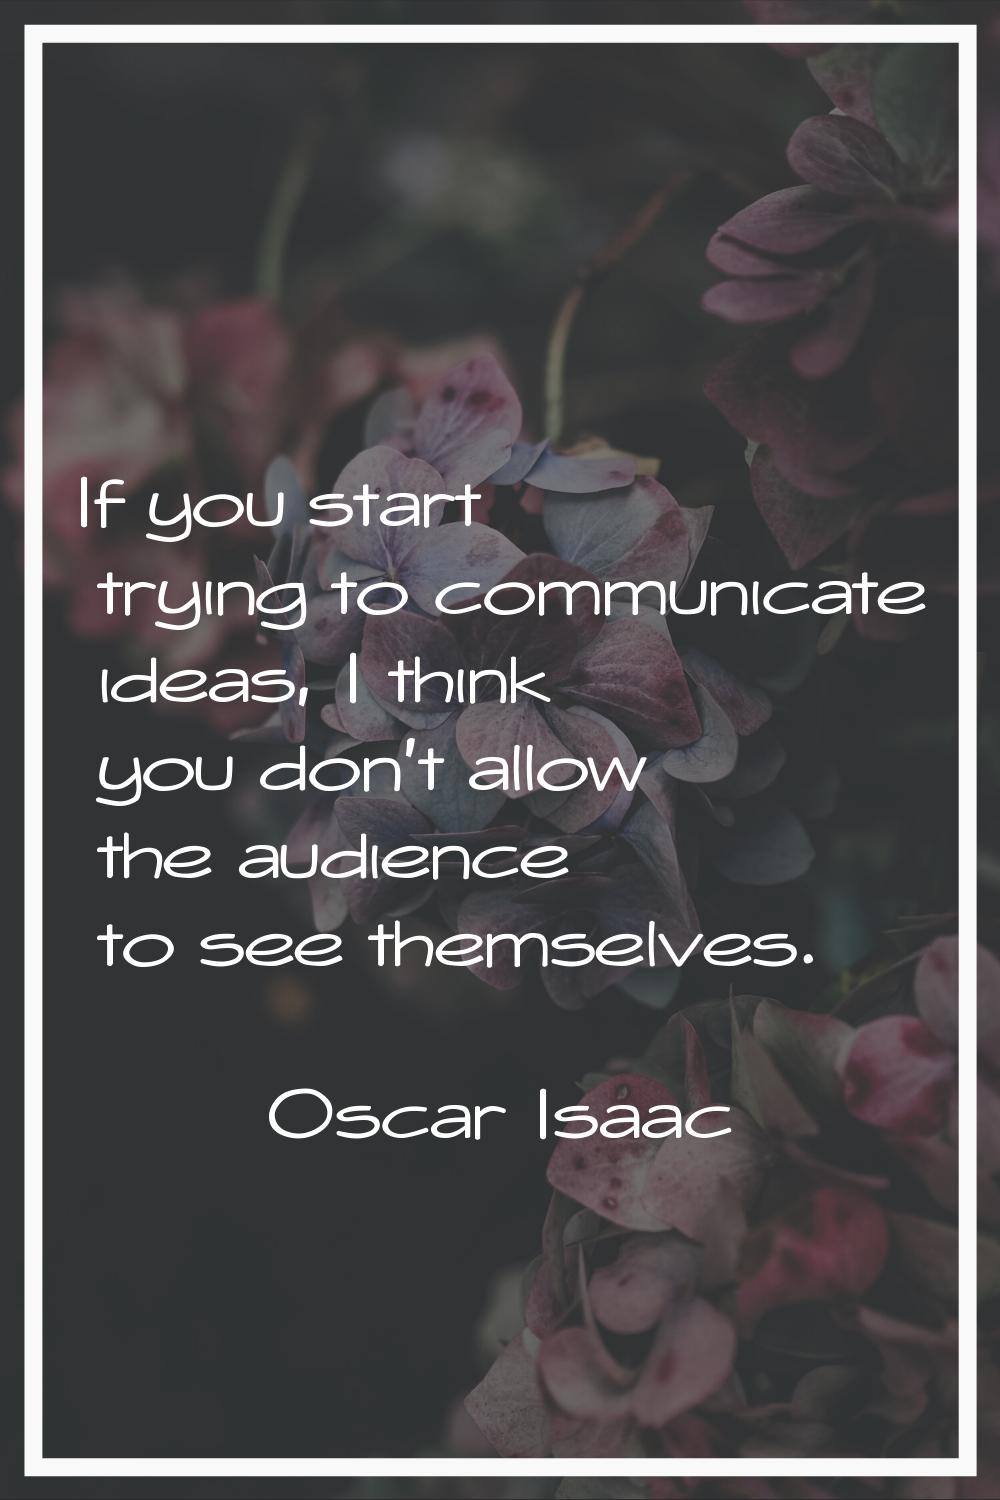 If you start trying to communicate ideas, I think you don't allow the audience to see themselves.